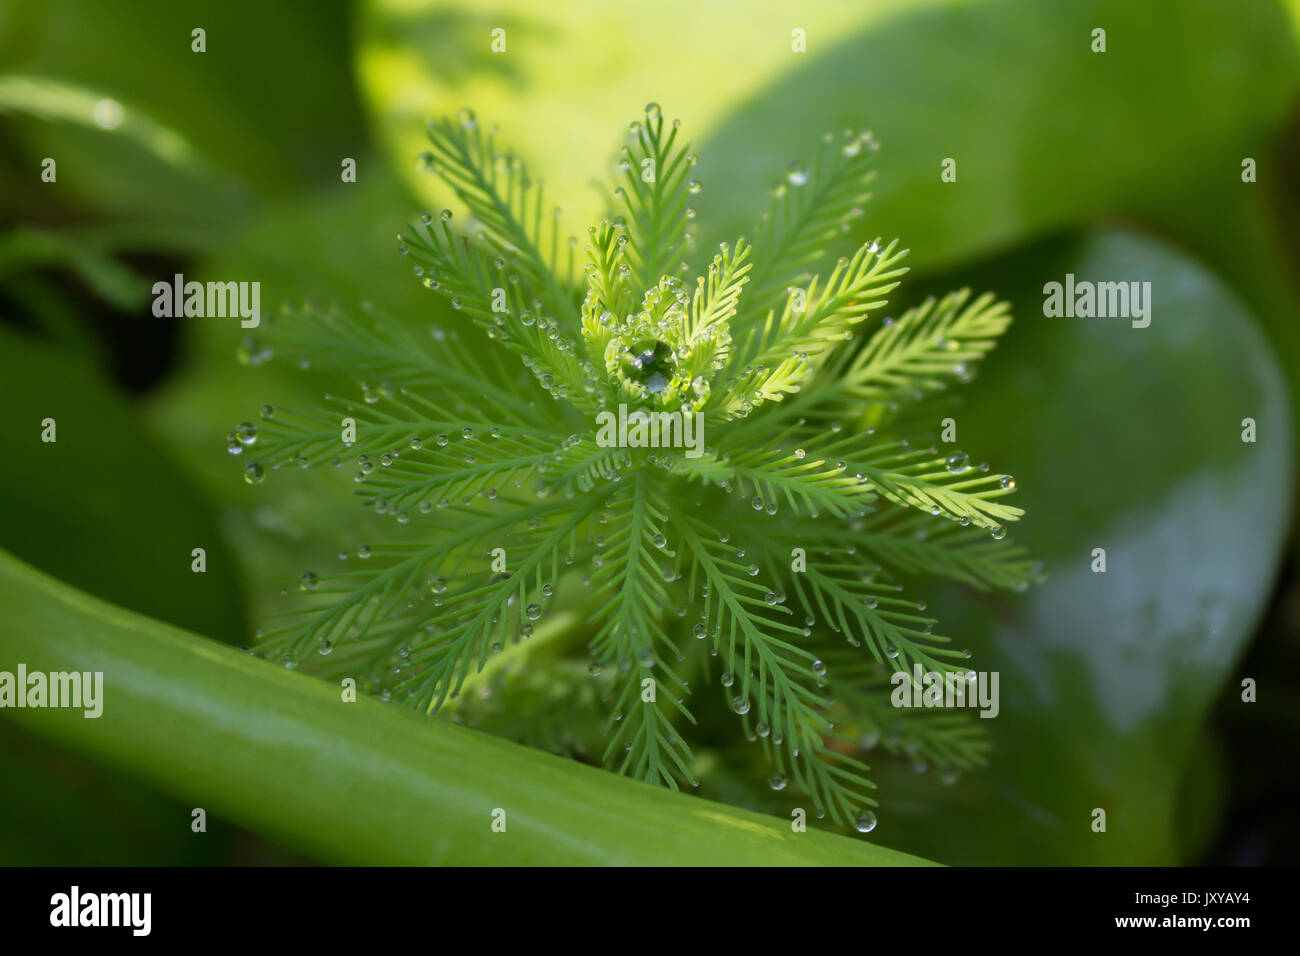 Droplets of water on delicate looking foliage of a pond plant. Stock Photo